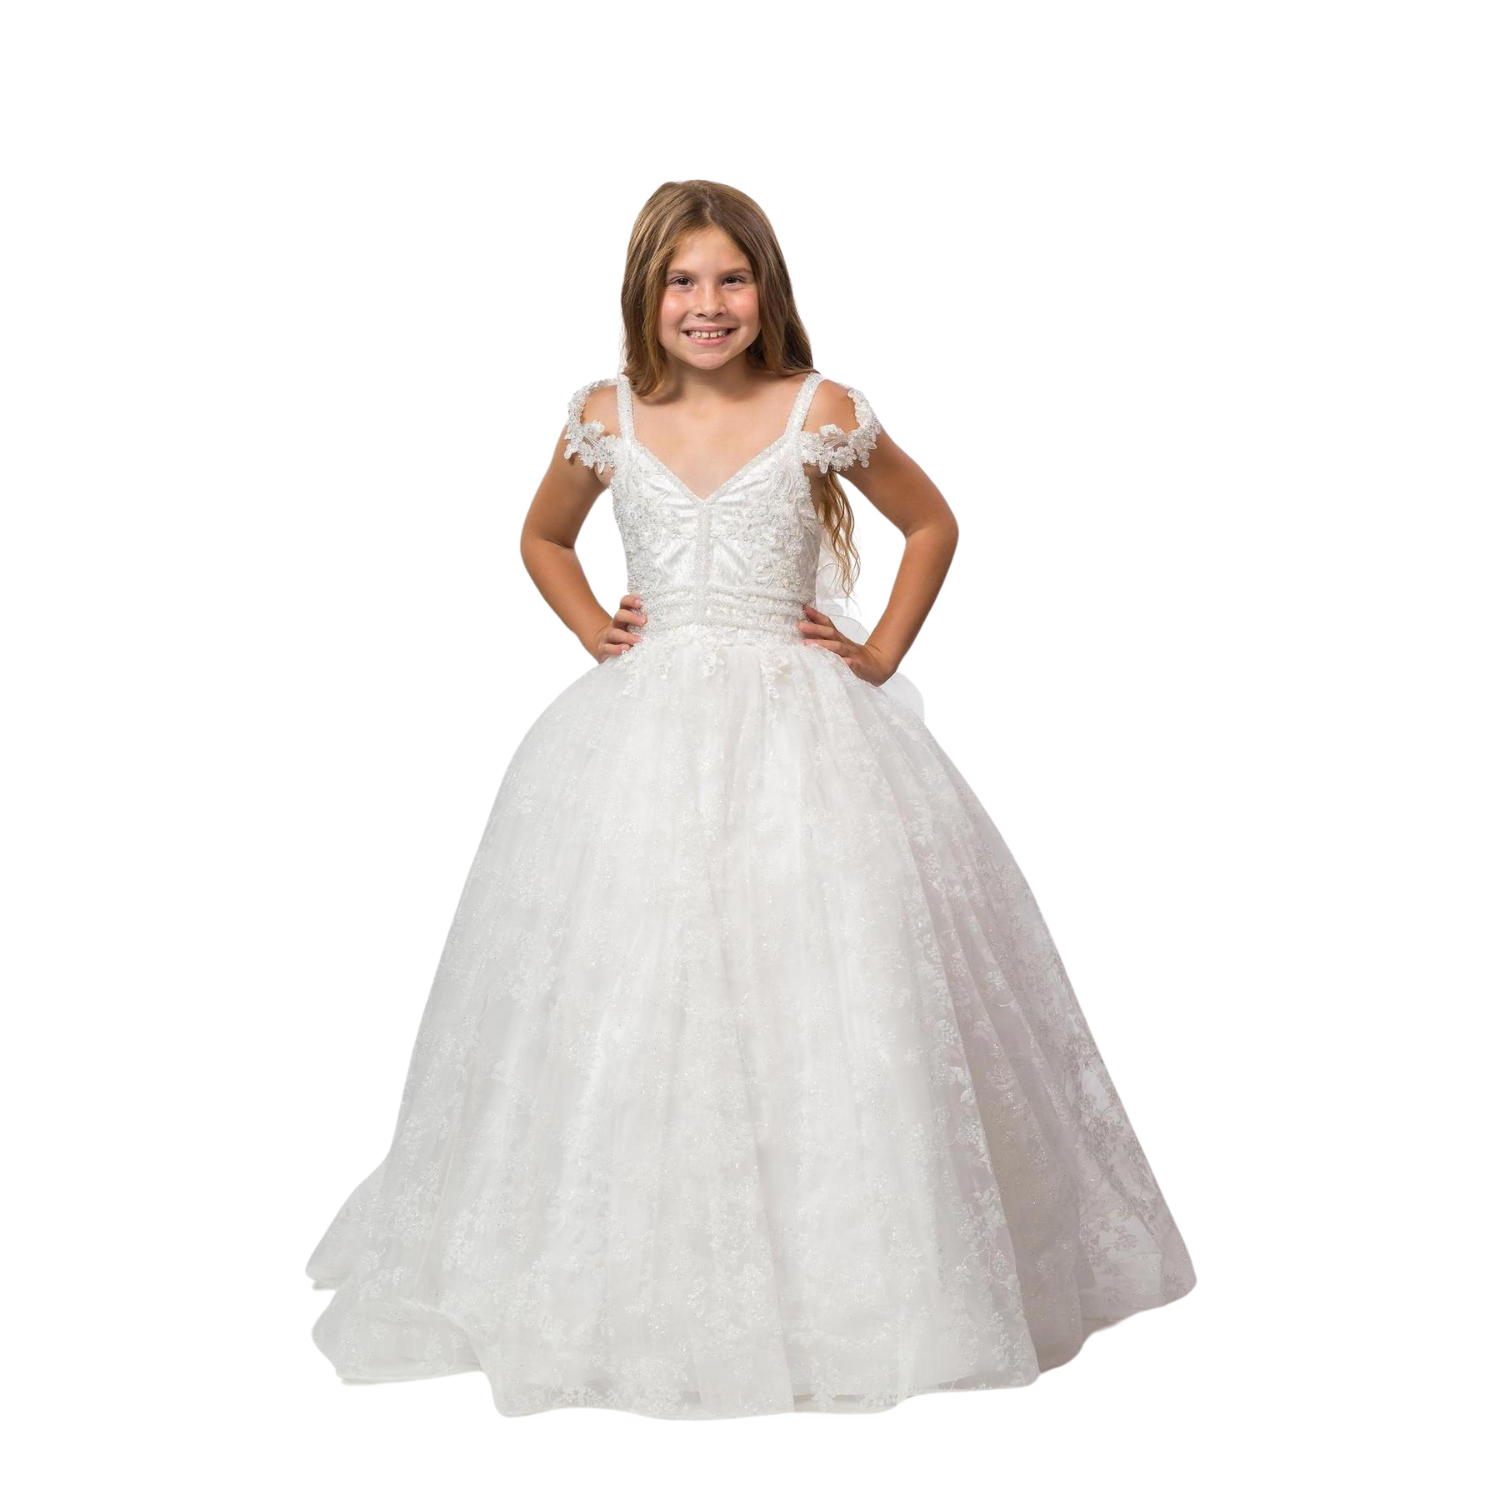 Olivia's Gown Girls Formal Dress